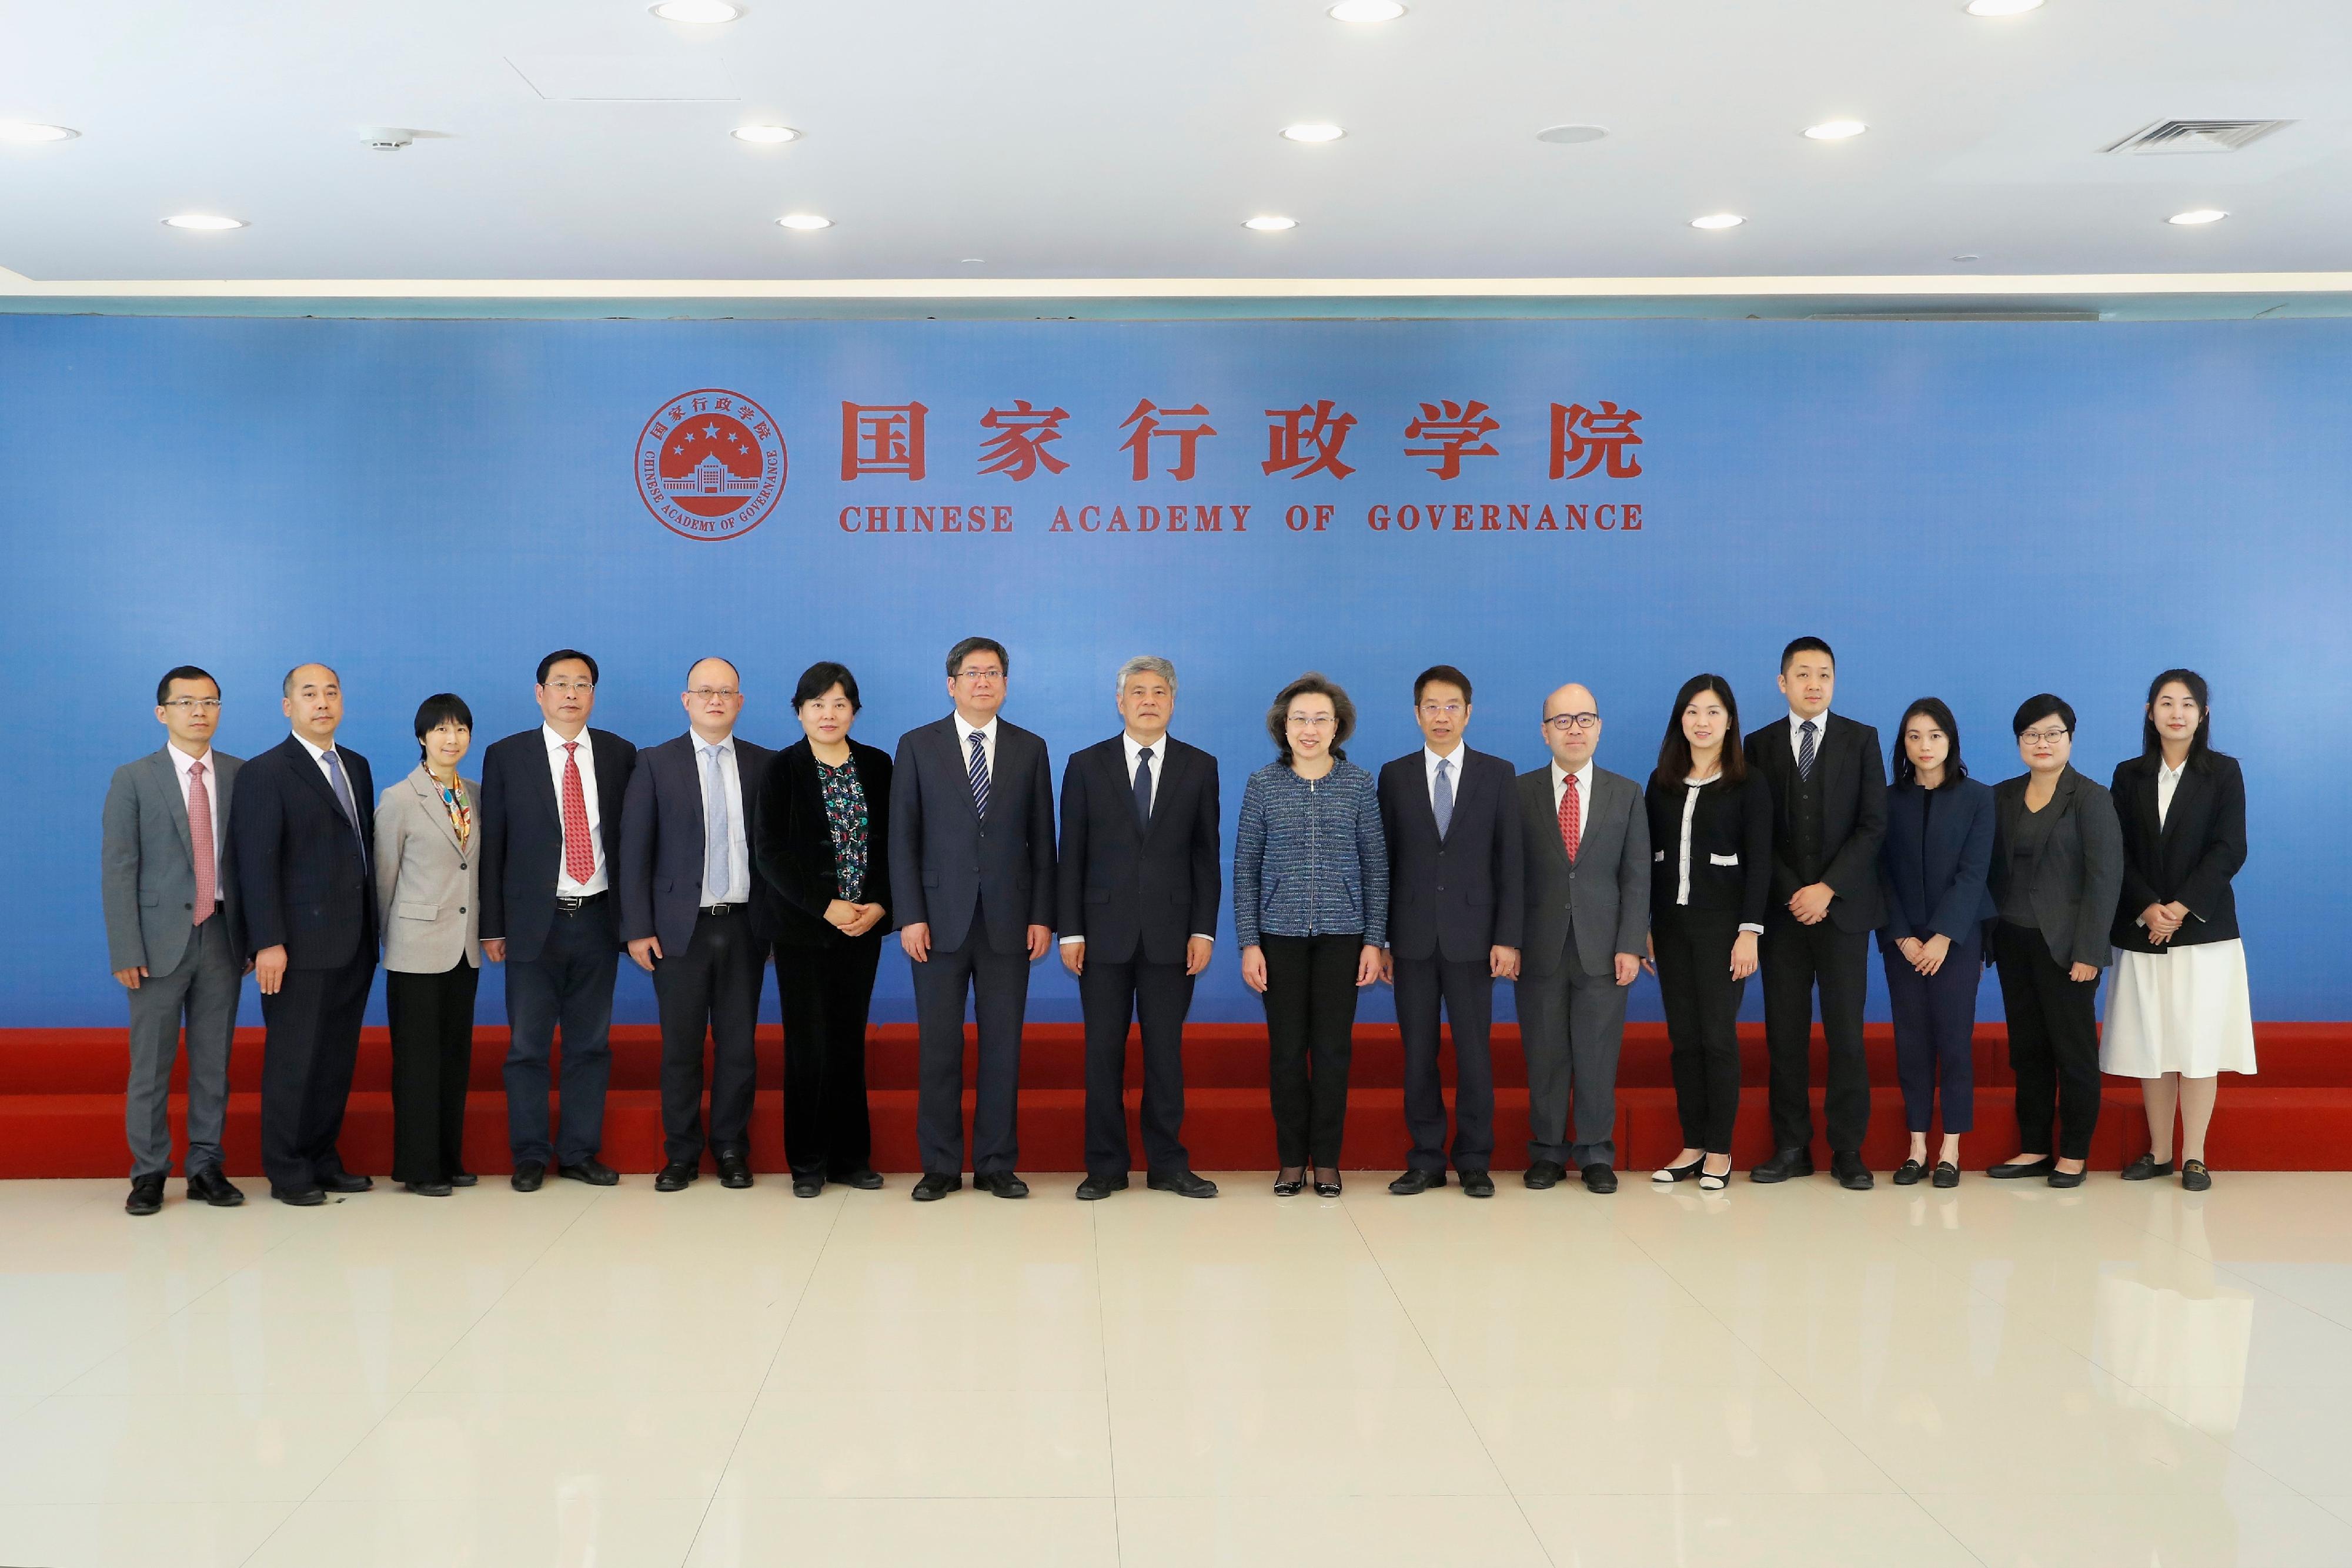 The Secretary for the Civil Service, Mrs Ingrid Yeung, continued her visit in Beijing today (April 27) and called on the National Academy of Governance (NAG) in the morning. Mrs Yeung (eighth right), is pictured with the Permanent Secretary for the Civil Service, Mr Clement Leung (seventh right); the Executive Vice President of the NAG, Mr Xie Chuntao (eighth left); and Vice President of the NAG Mr Gong Weibin (seventh left).

